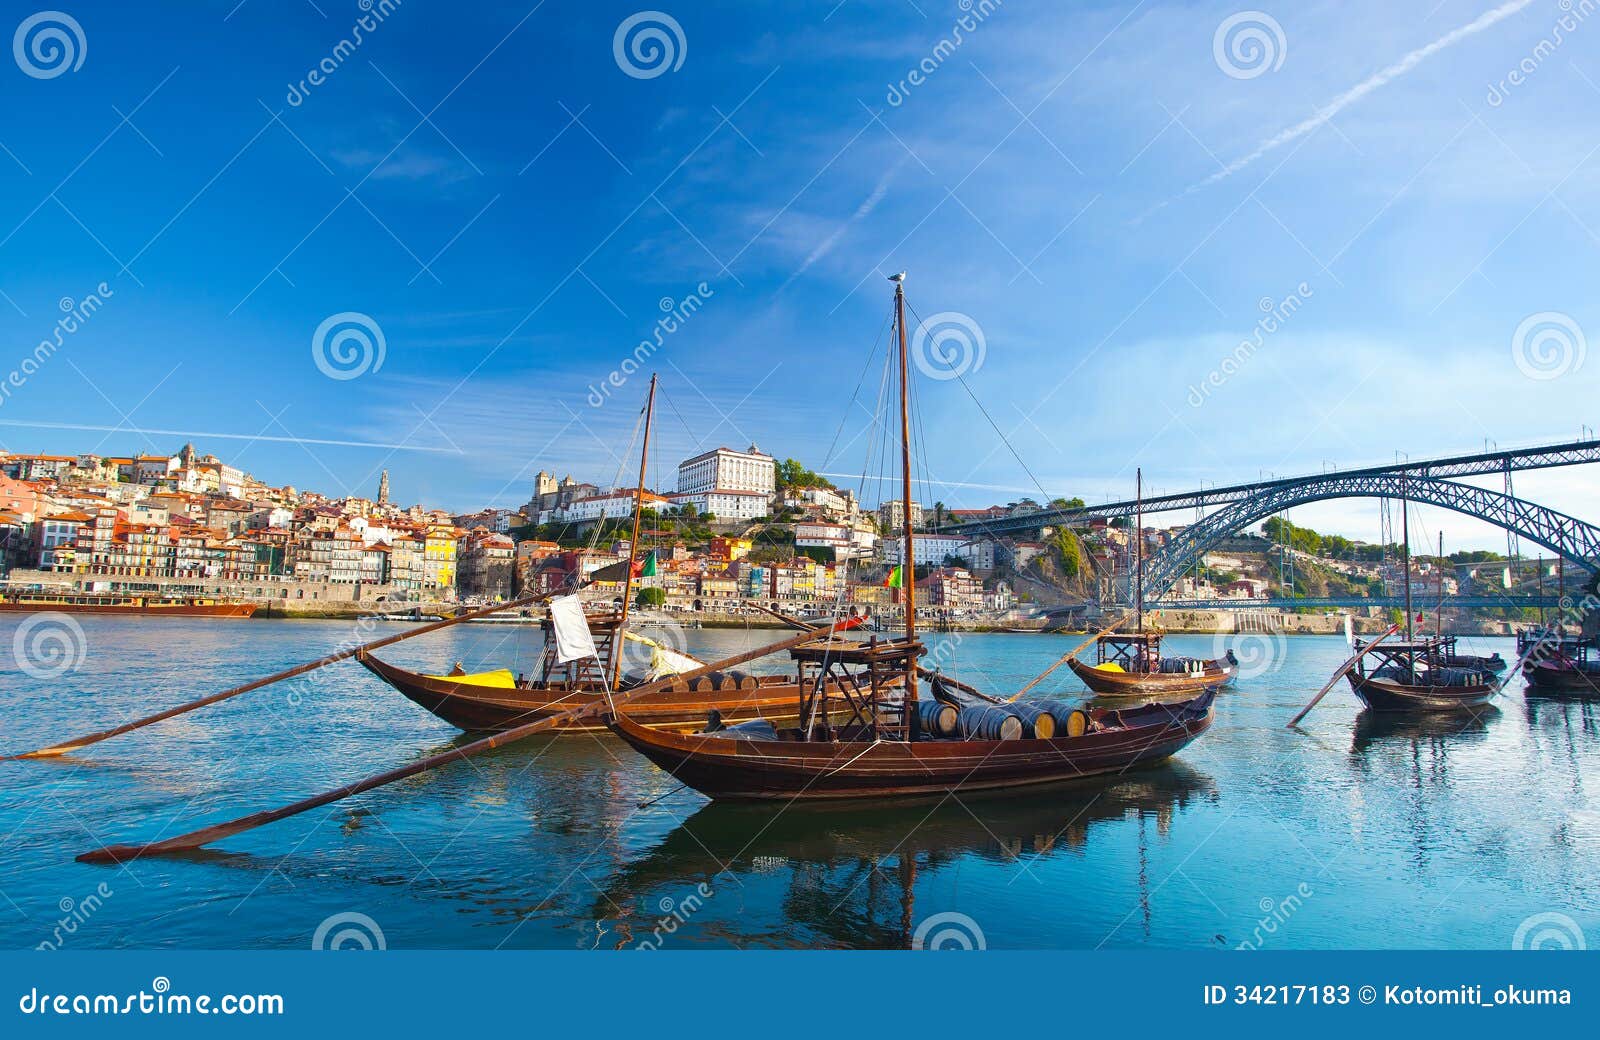 Ancient Boat In Oporto, In Which Was Used To Transport The ...